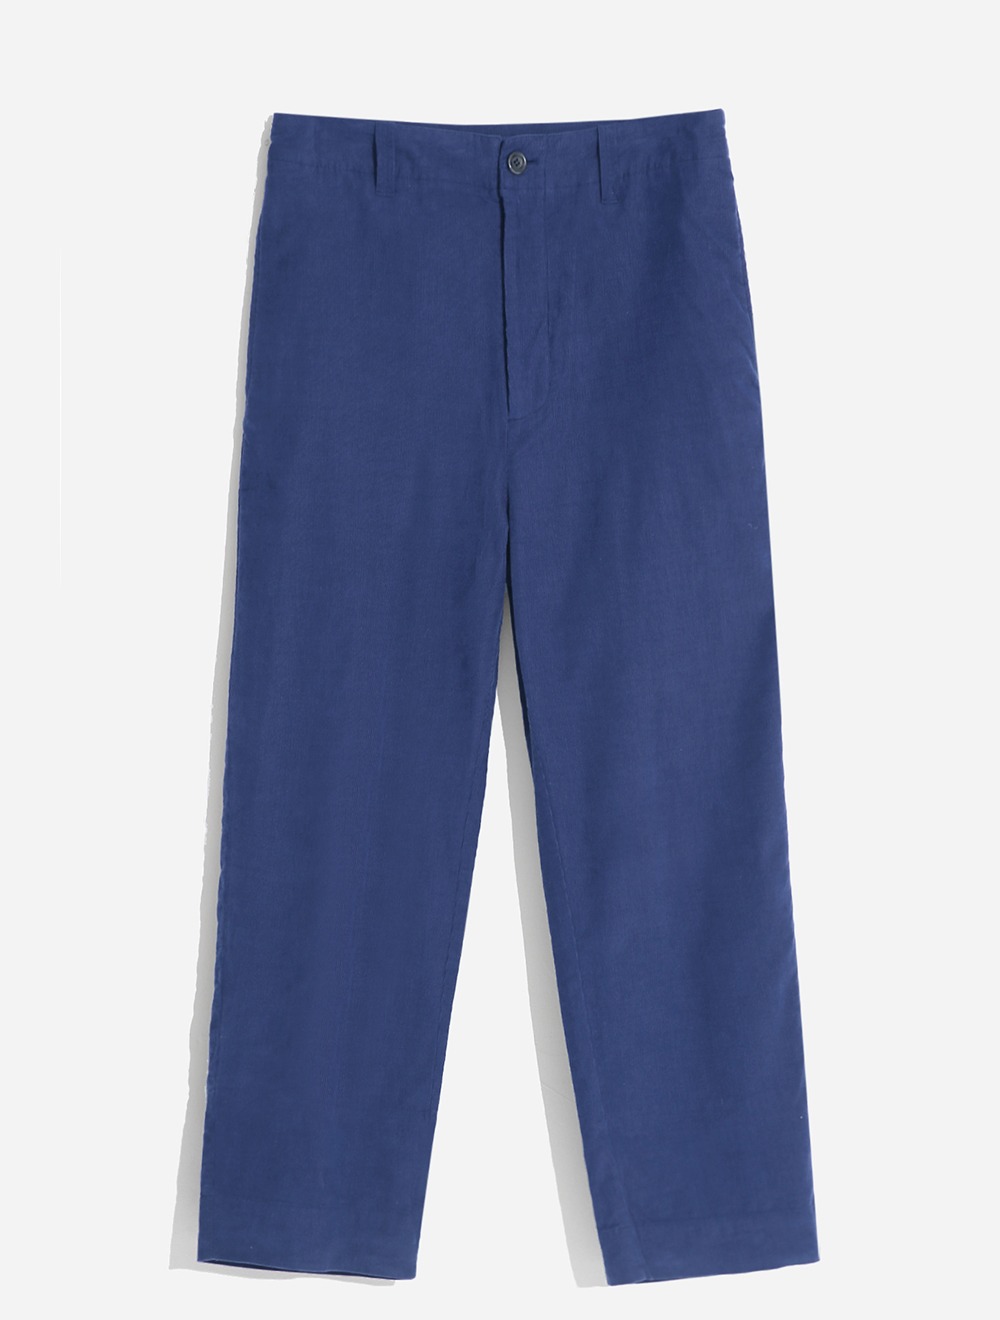 SUMMER CORDUROY FRENCH WORK PANTS (NAVY)